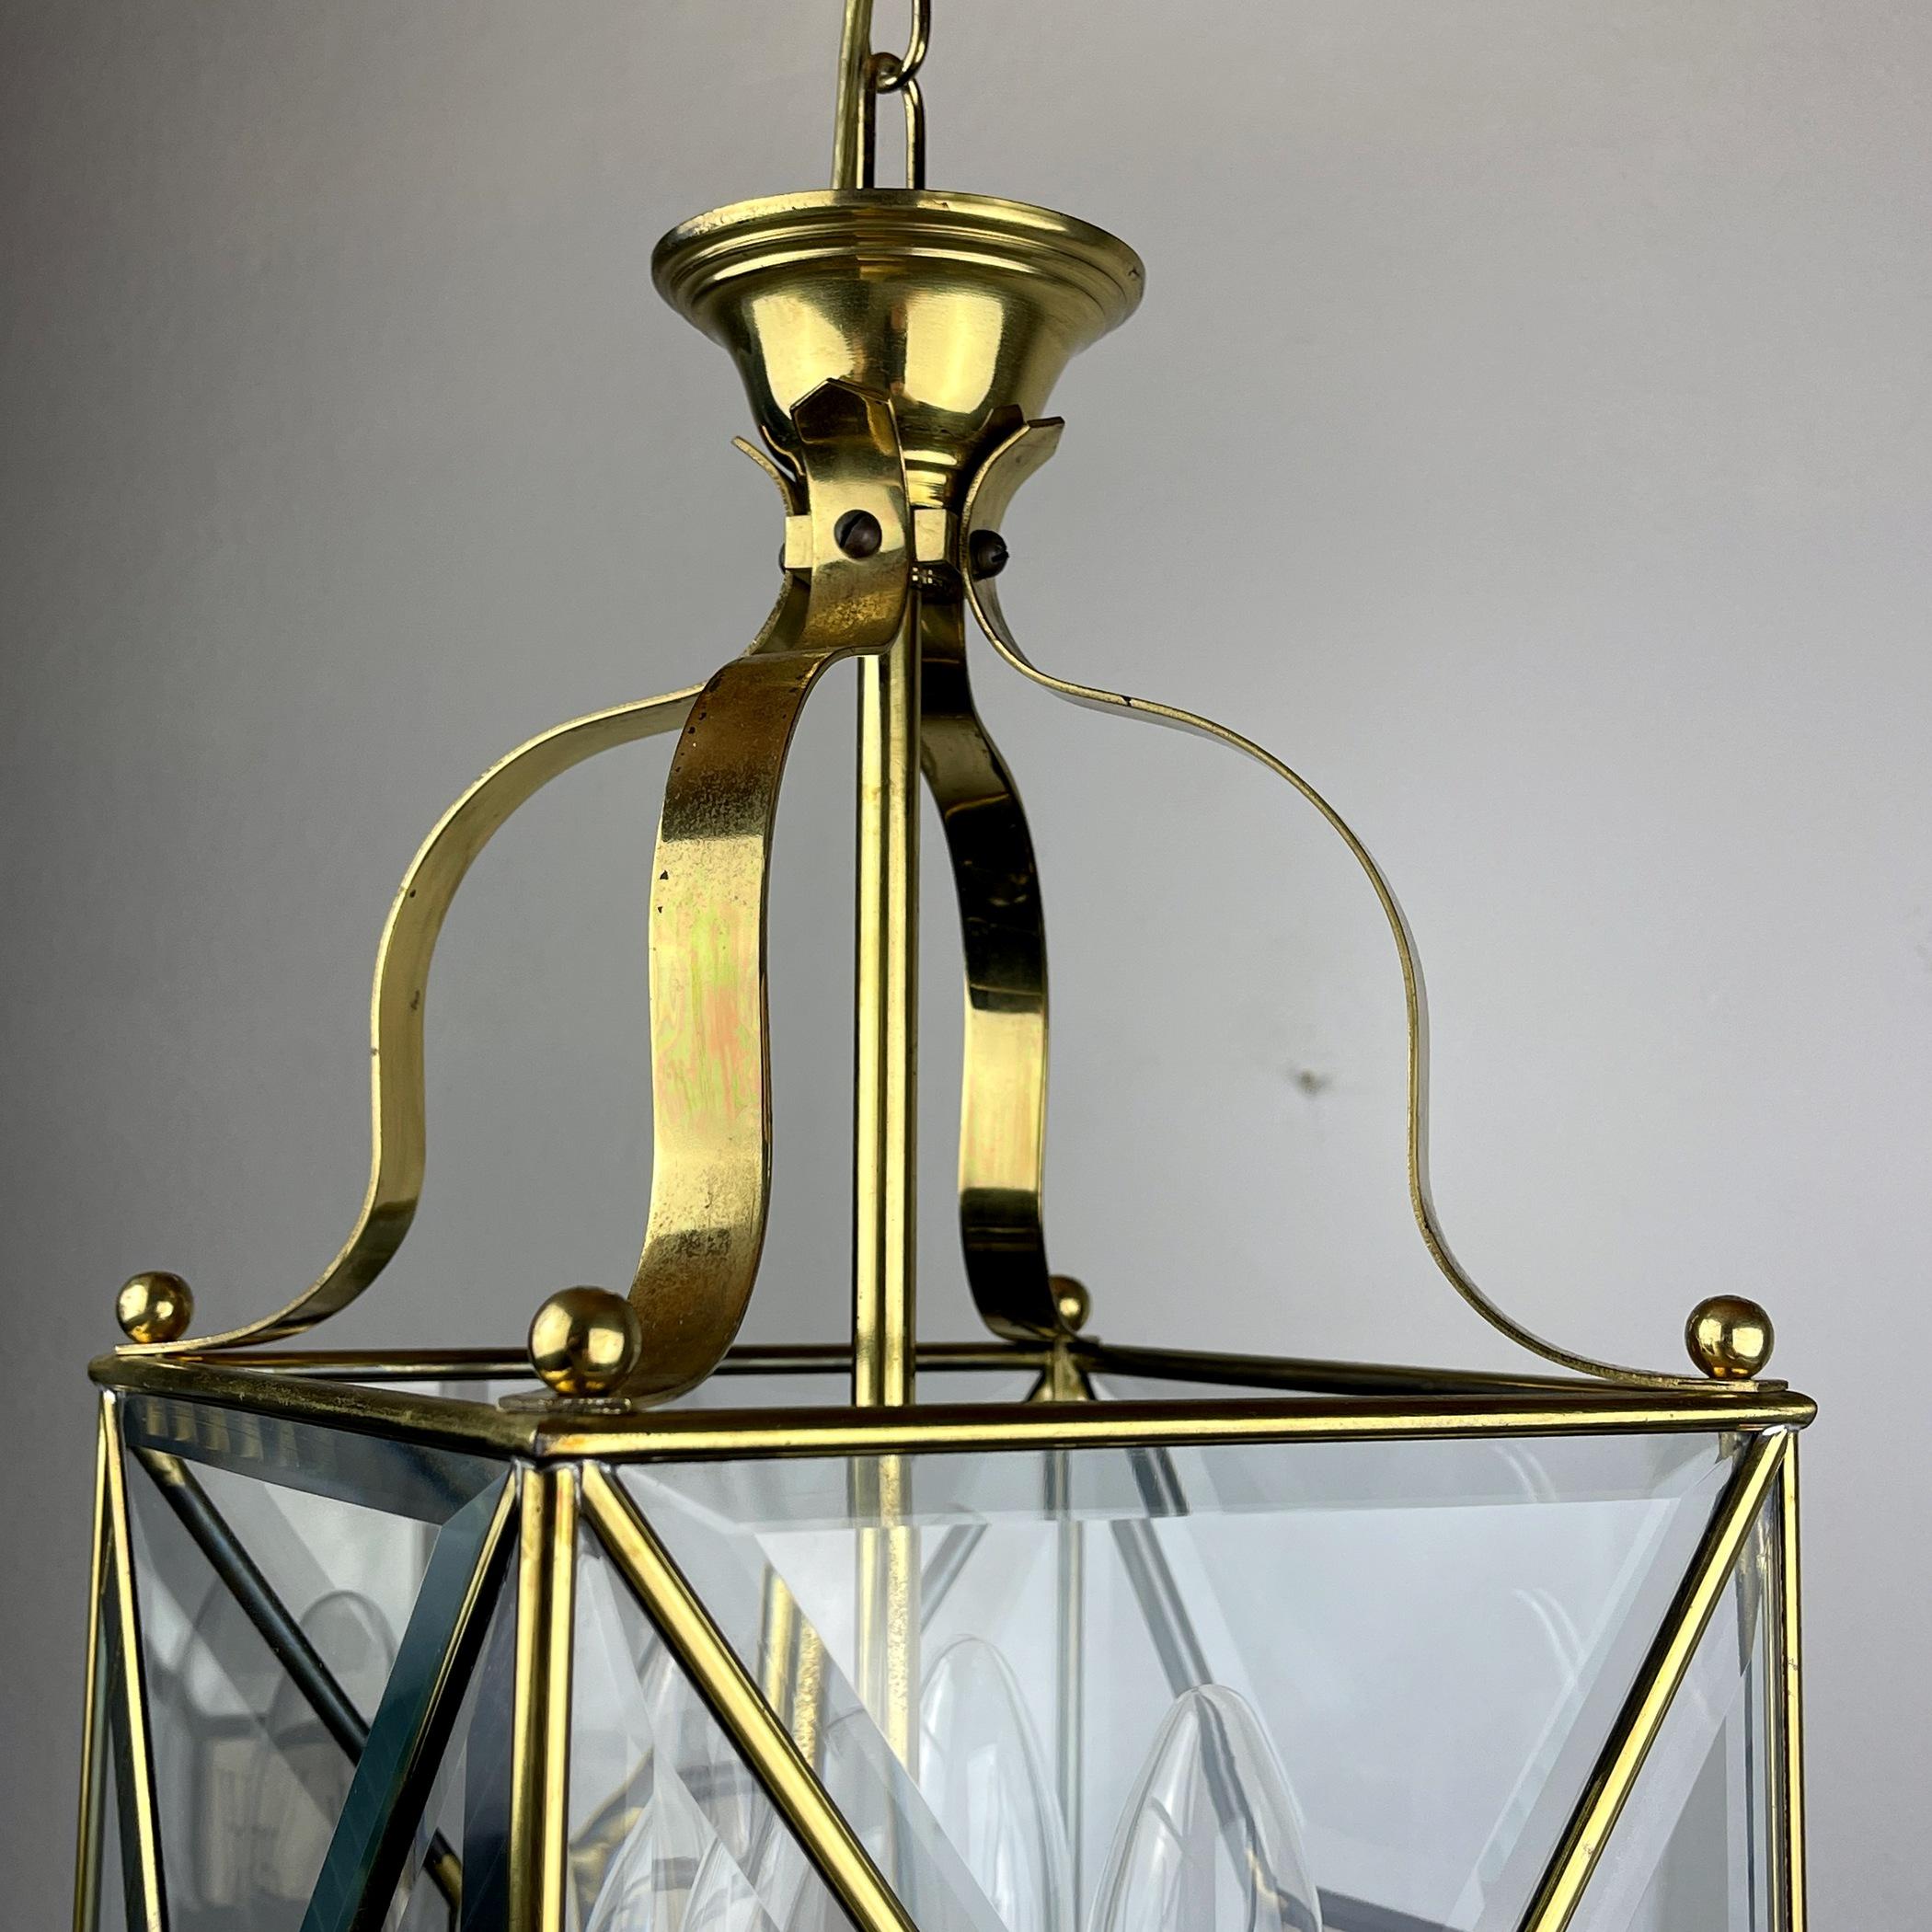 Vintage pendant lamp Italy '60s Brass Polished Glass Retro lighting Mid-century  For Sale 7